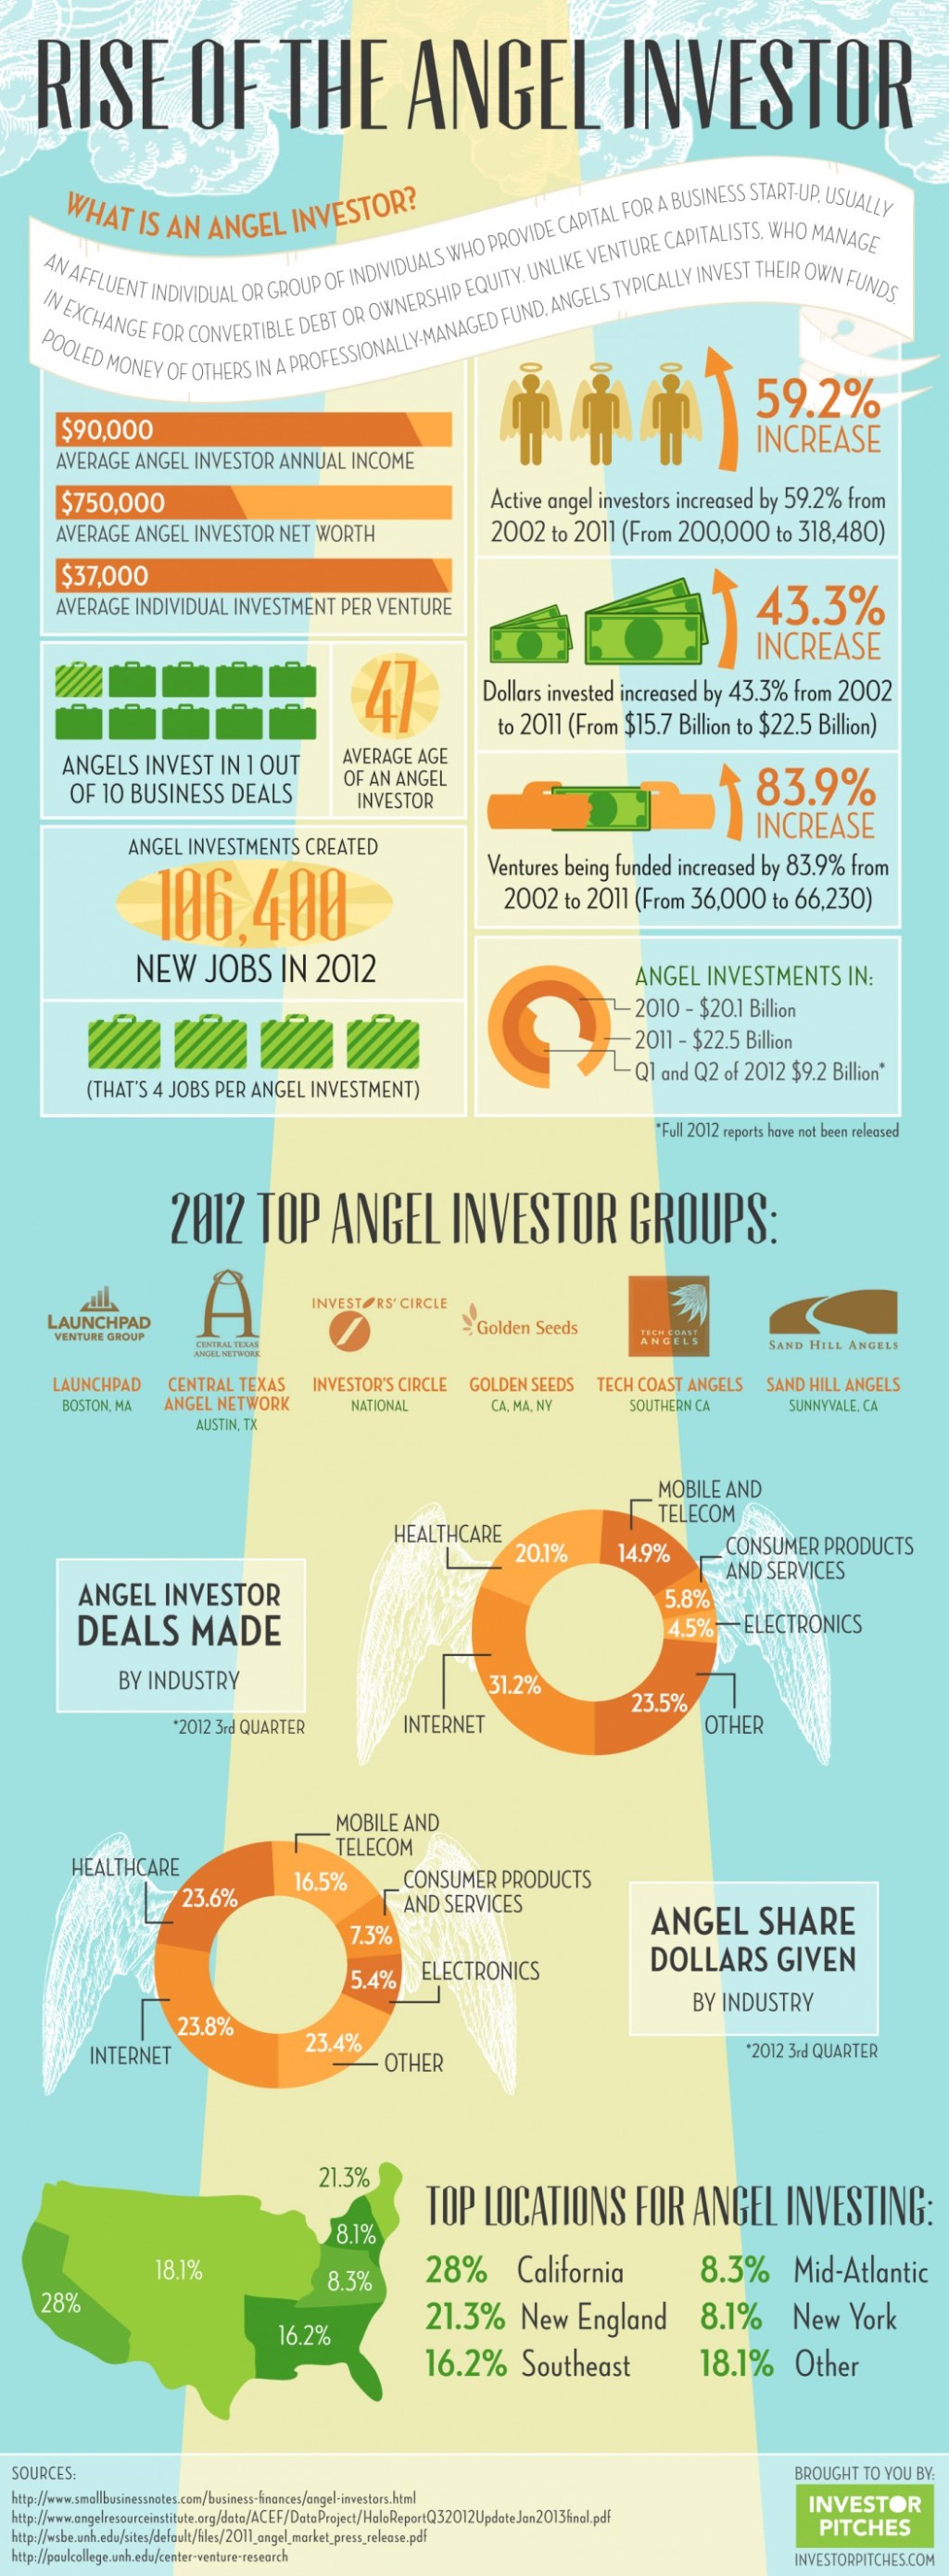 rise-of-the-angel-investor_5123ba1c3257a_w1052